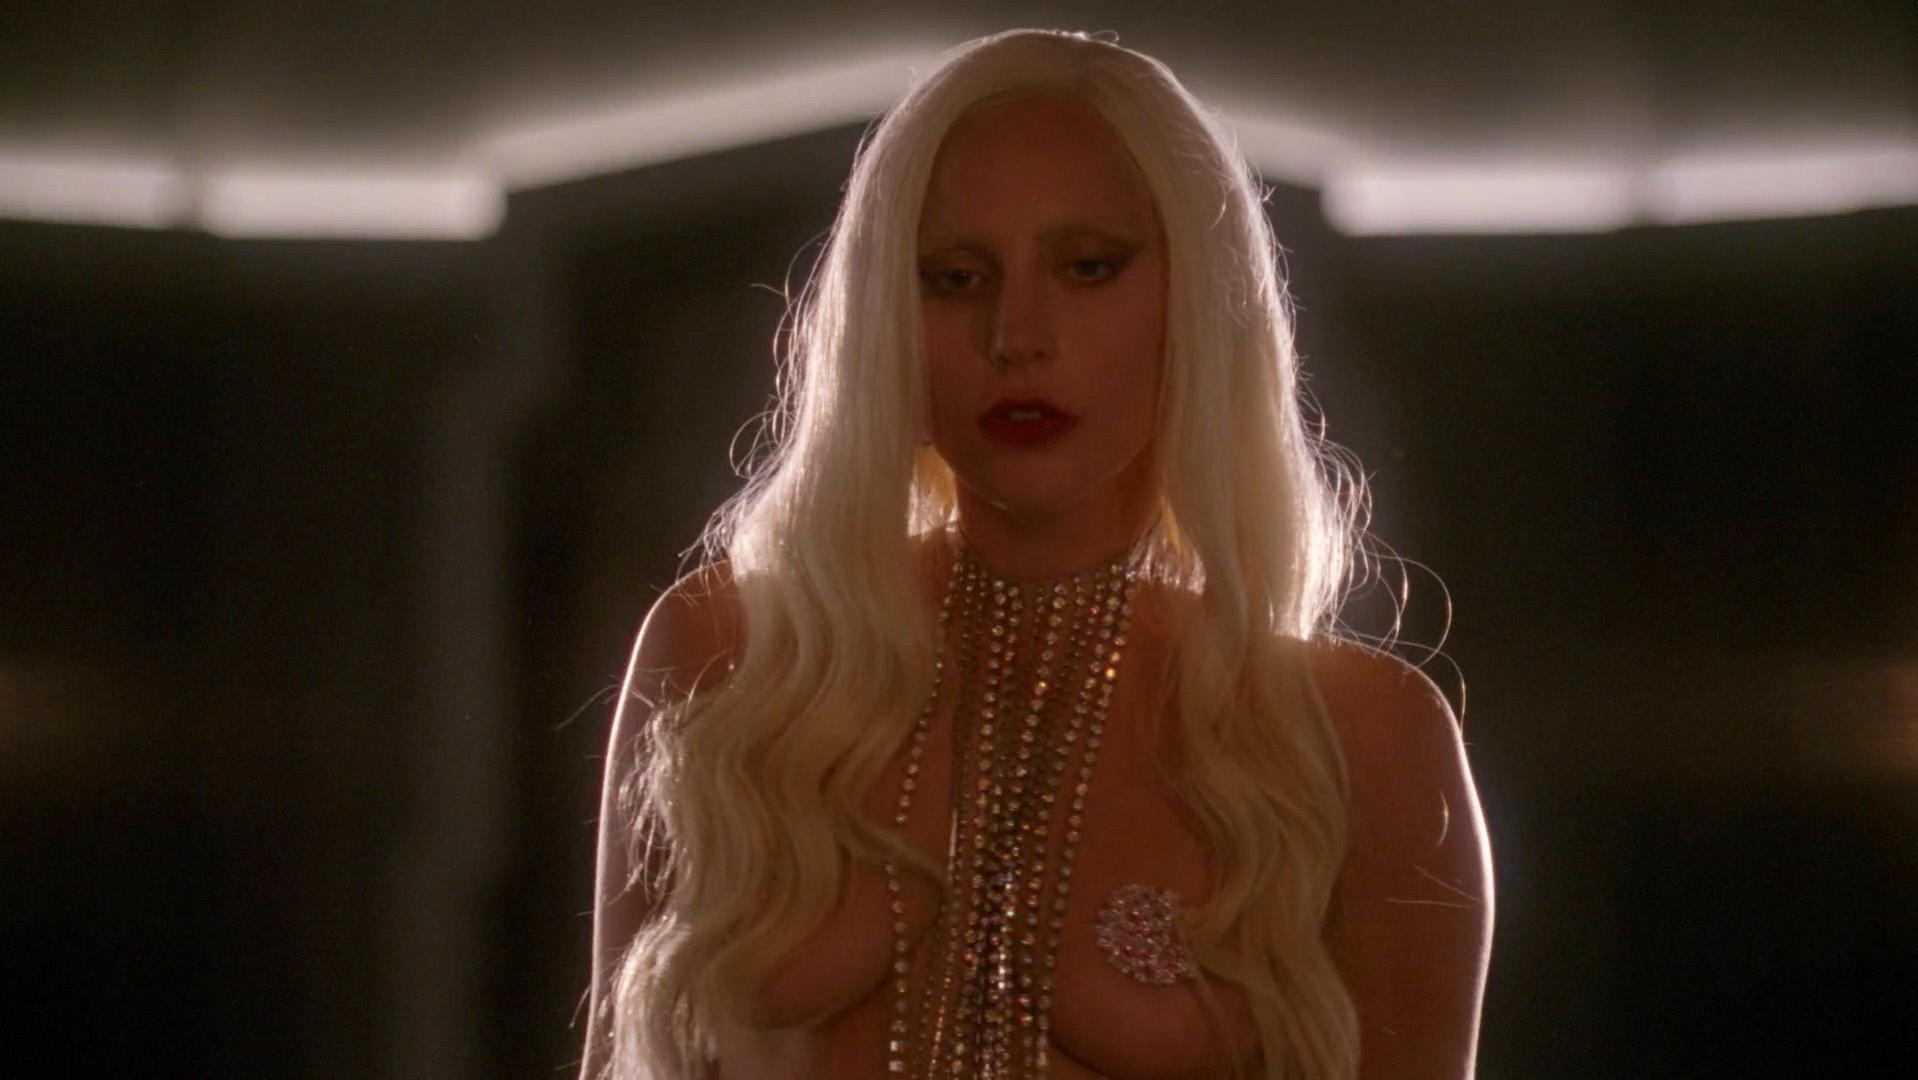 American horror story nudes